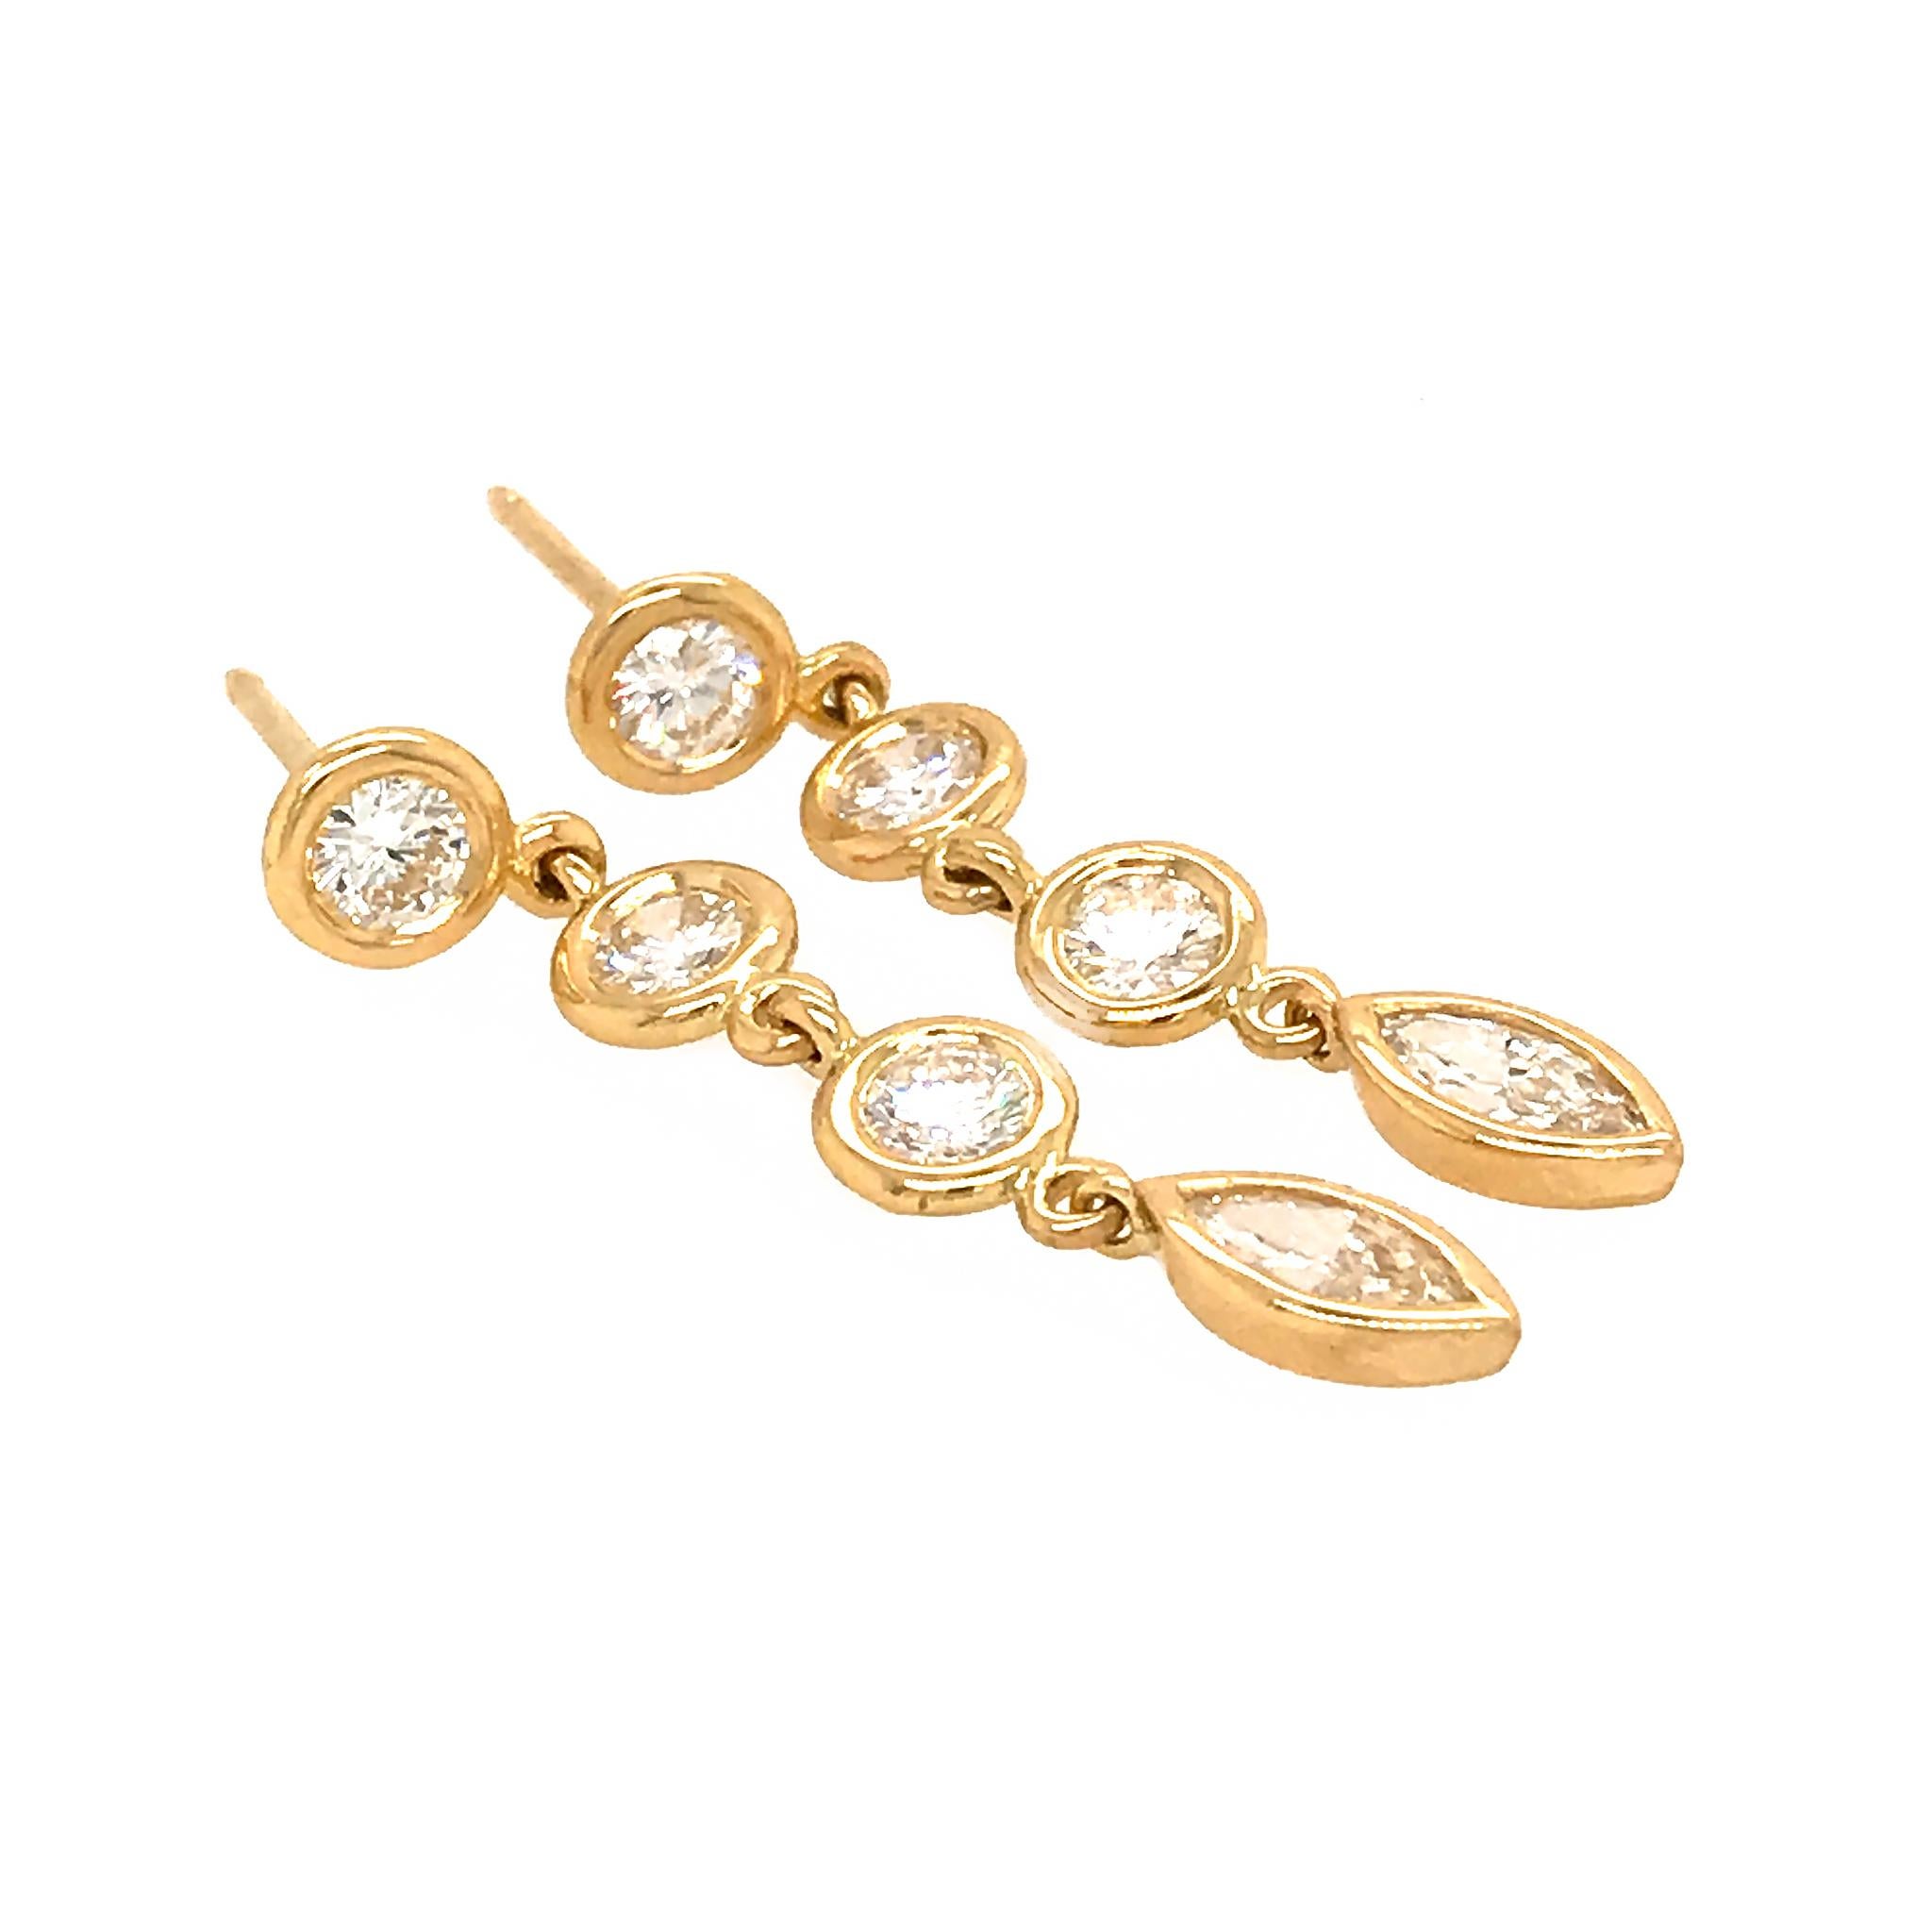 18k Yellow Gold
Diamond: 1.55 ct twd
Total Weight: 3.3 grams
Length: 1.25 inches